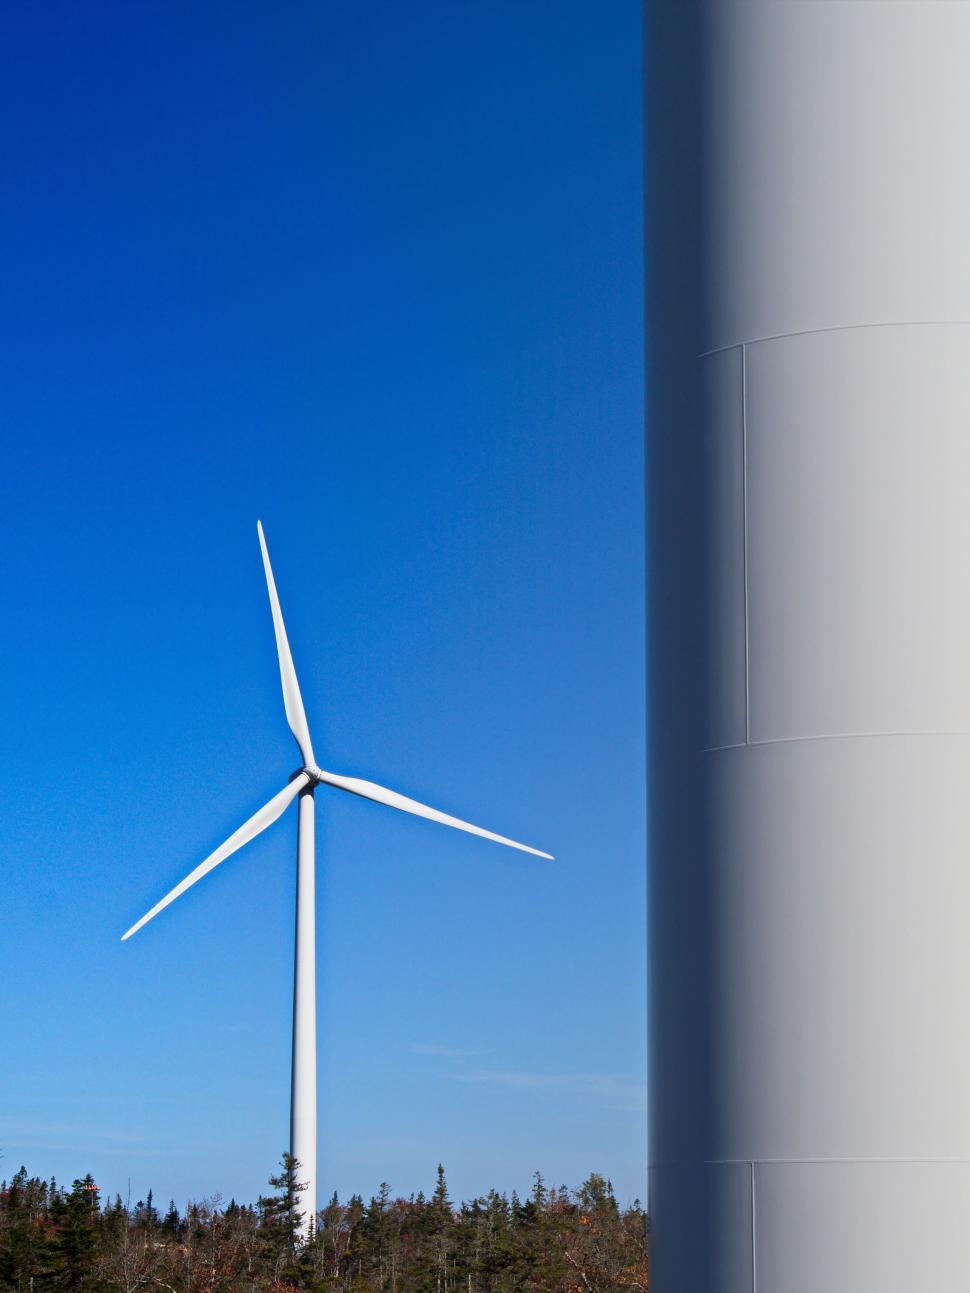 Free Image of Wind turbine against clear blue sky 